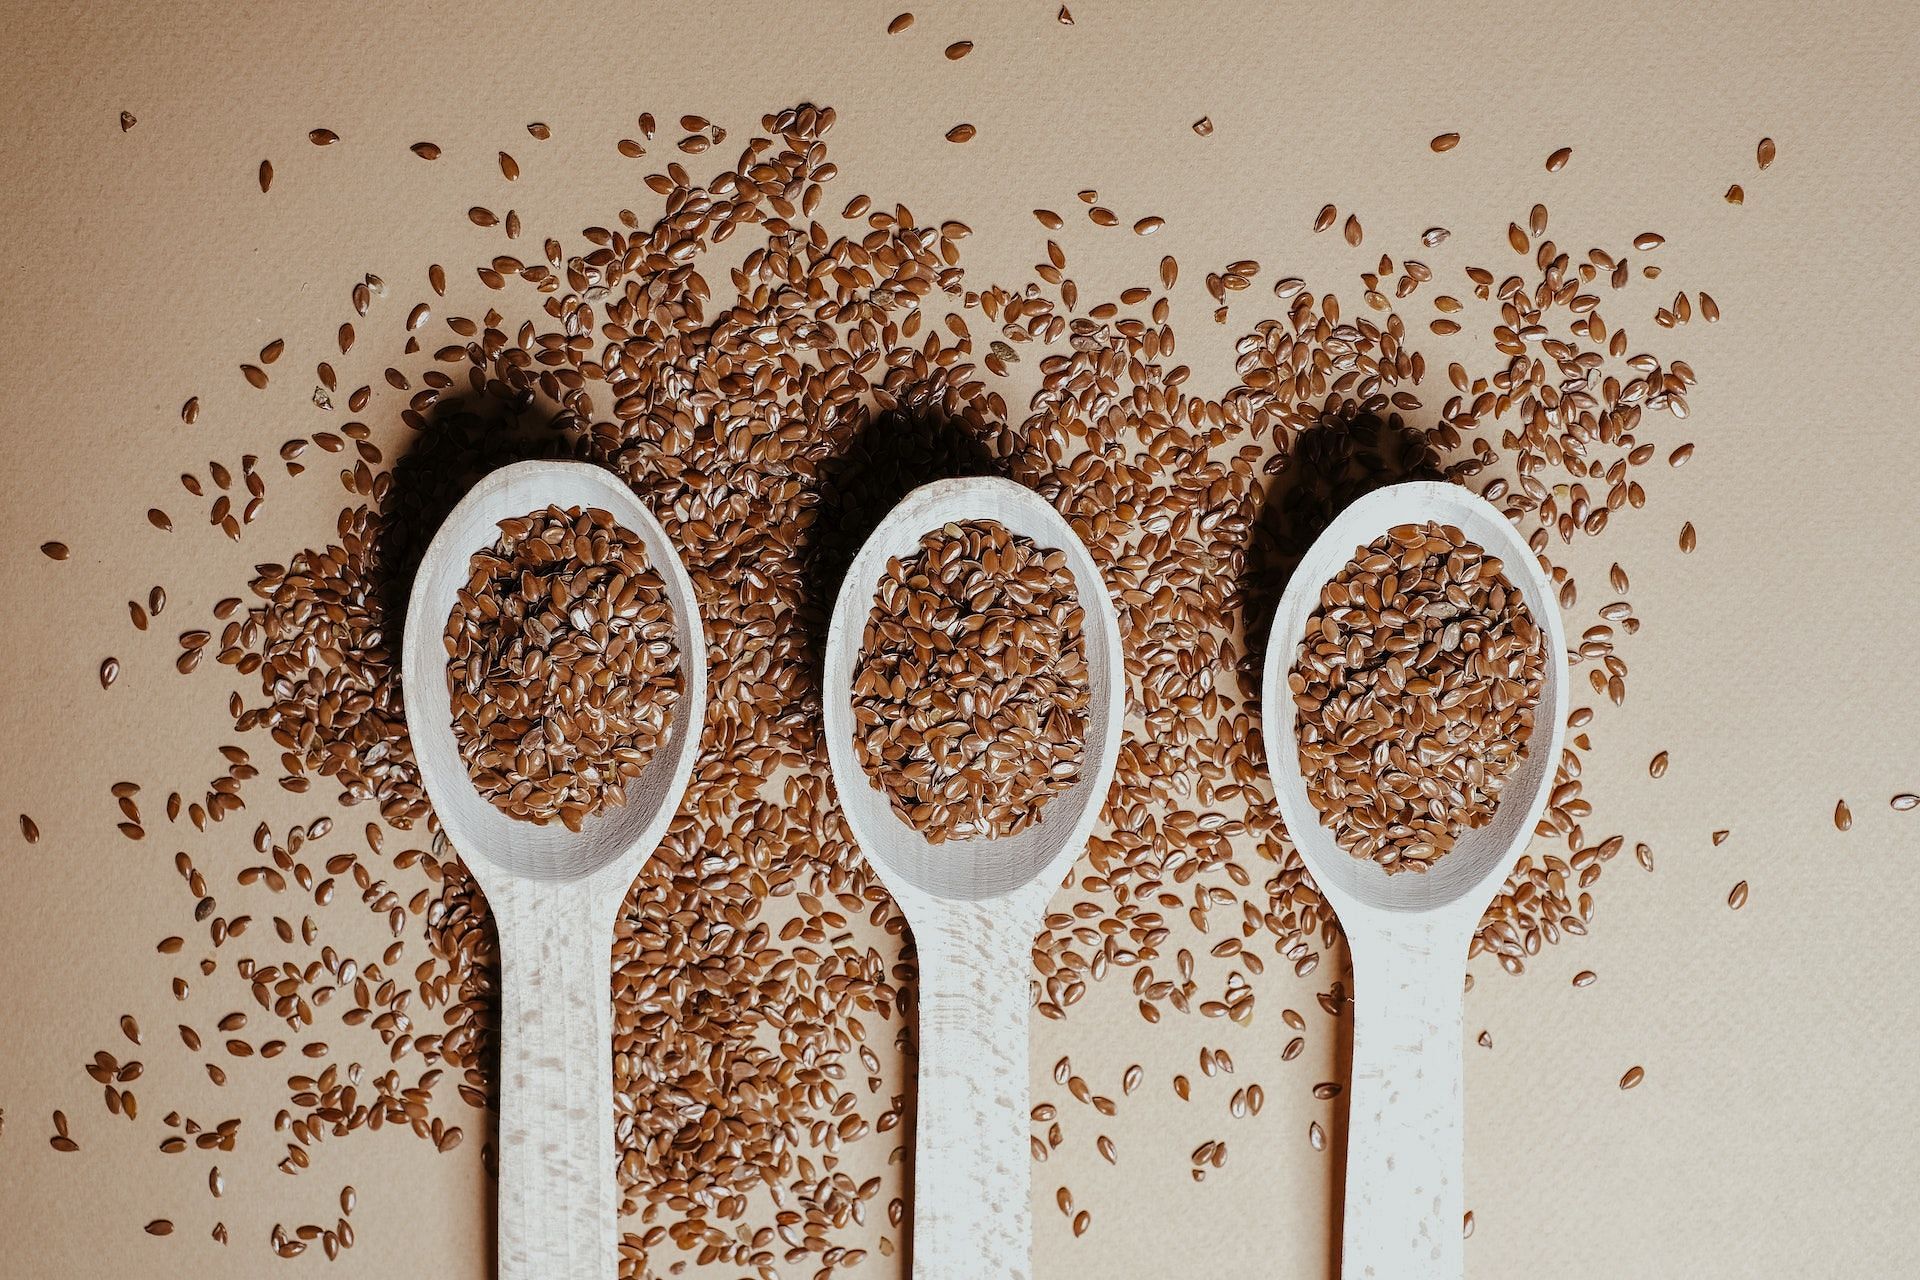 Flaxseed powder may prevent some cancers. (Photo via Pexels/Vie Studio)